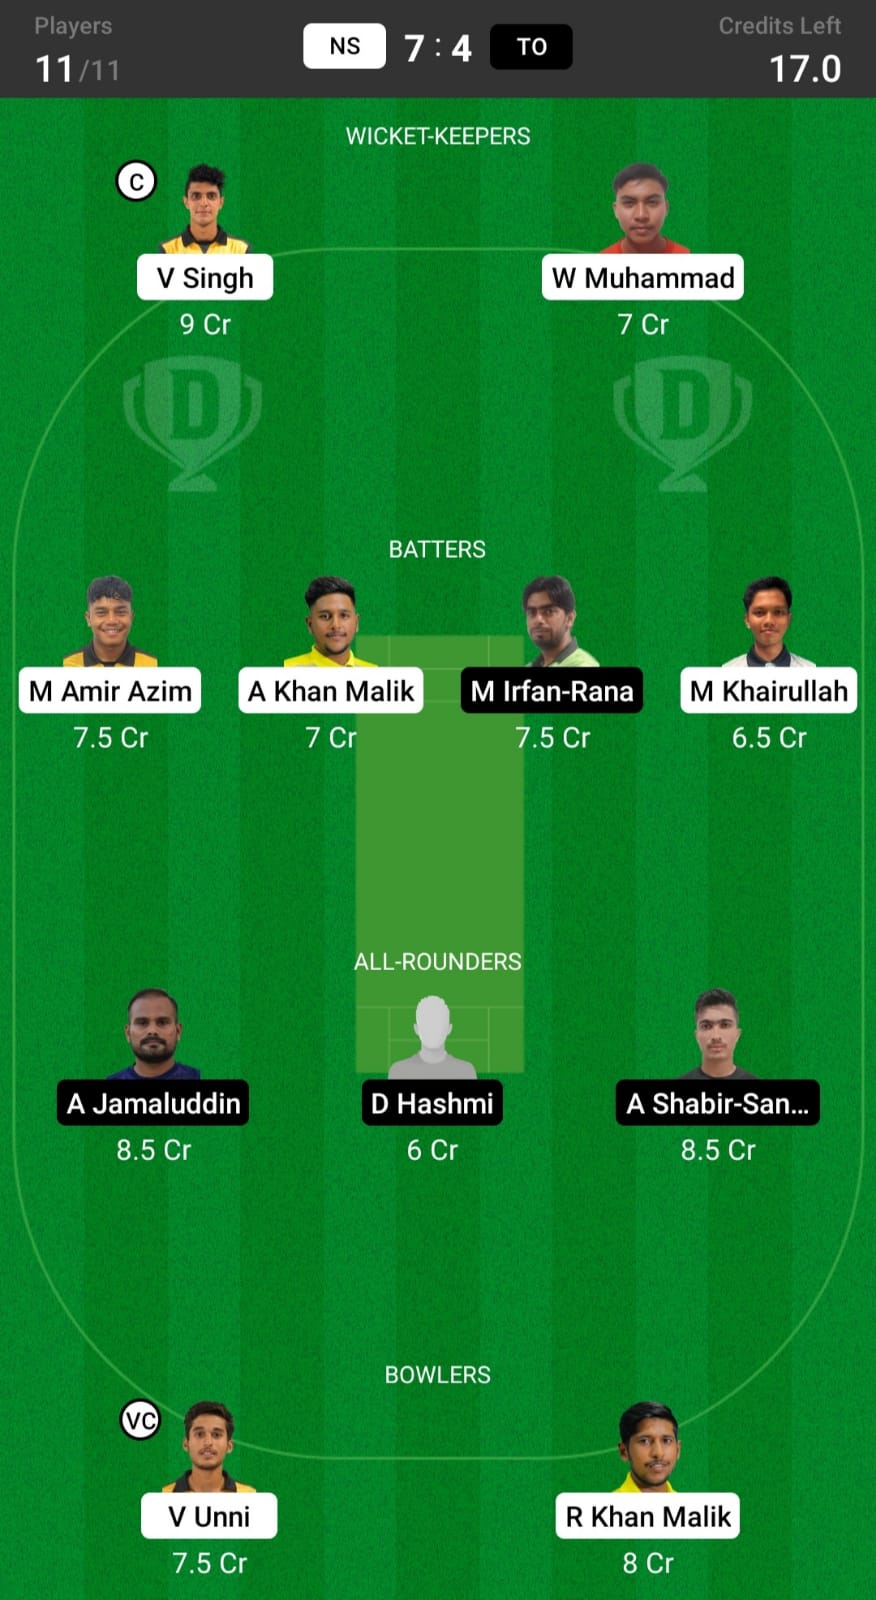 NS vs TO Dream 11 Team Today